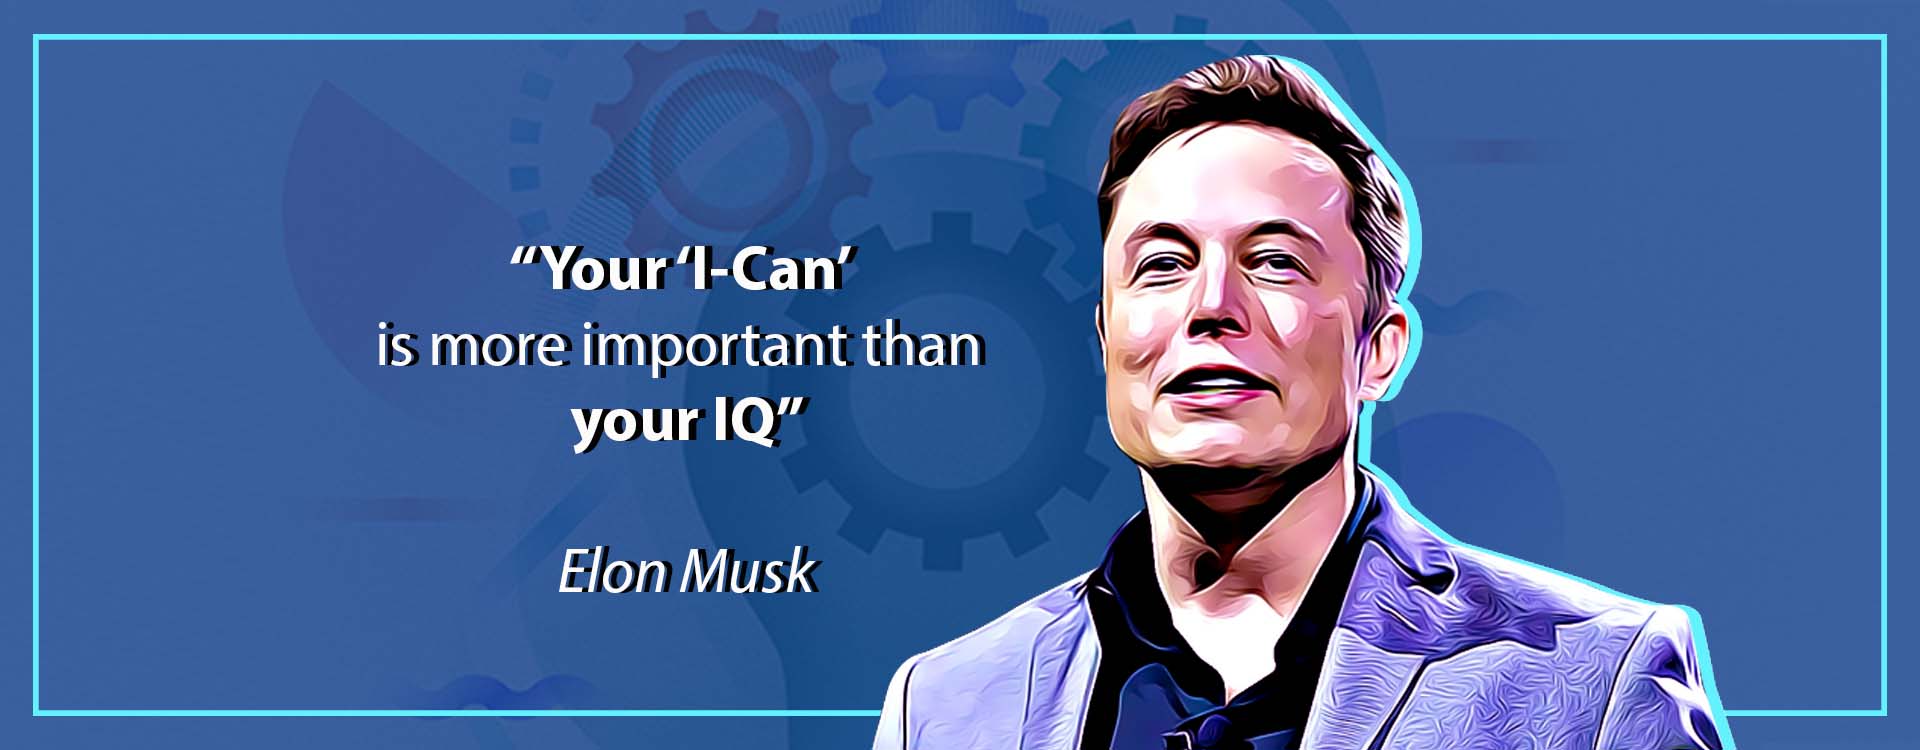 Elon Musk: Decoding his Mantras for Self-Improvement | Growth Tips